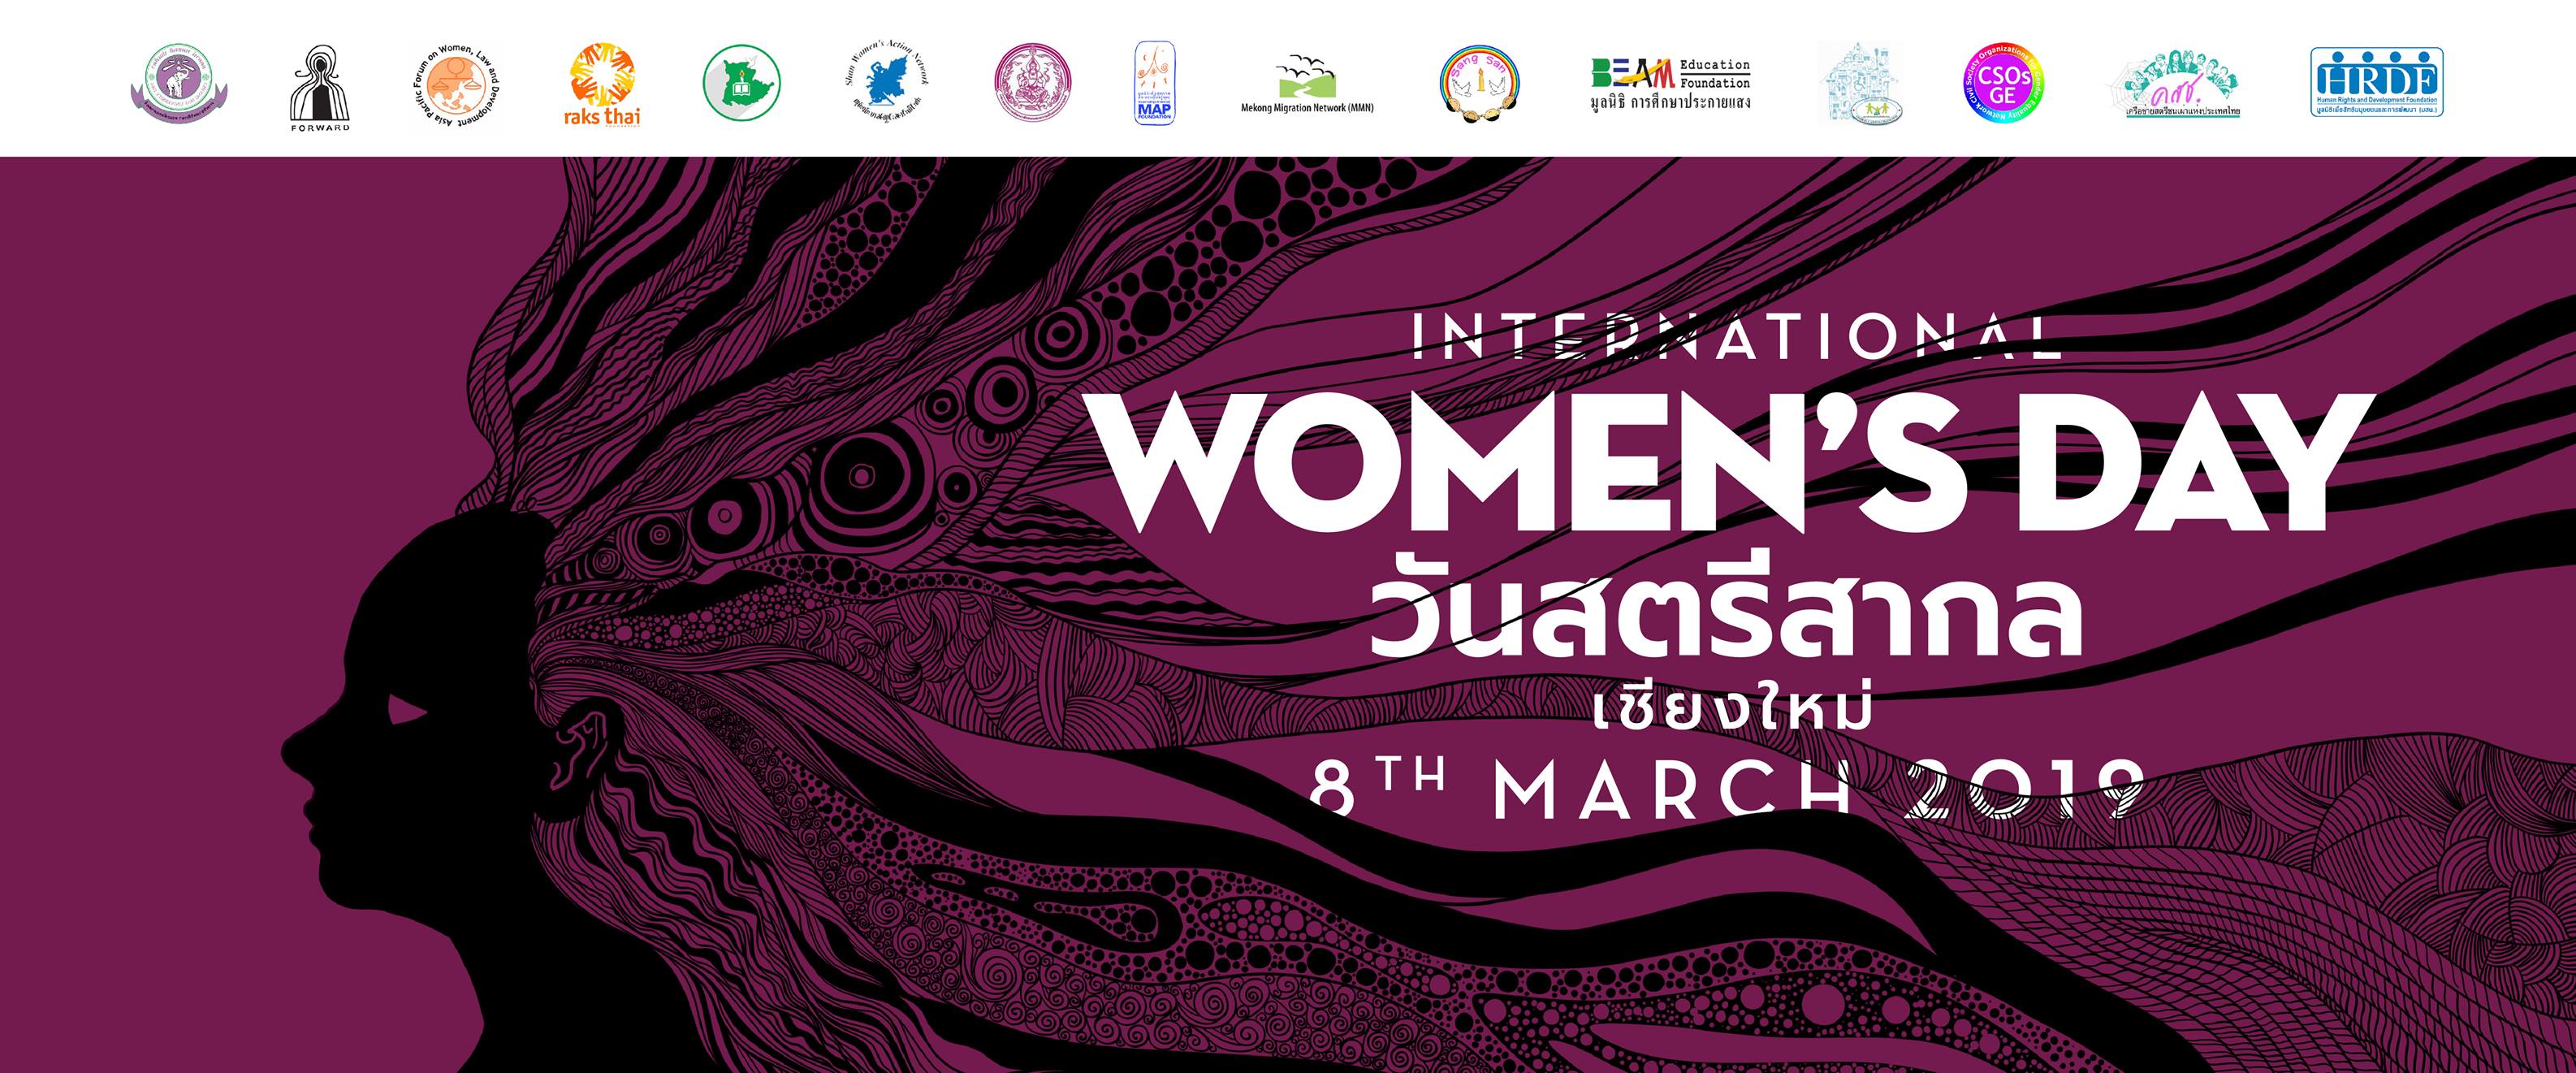 WomensDay2019CoverFBEvent